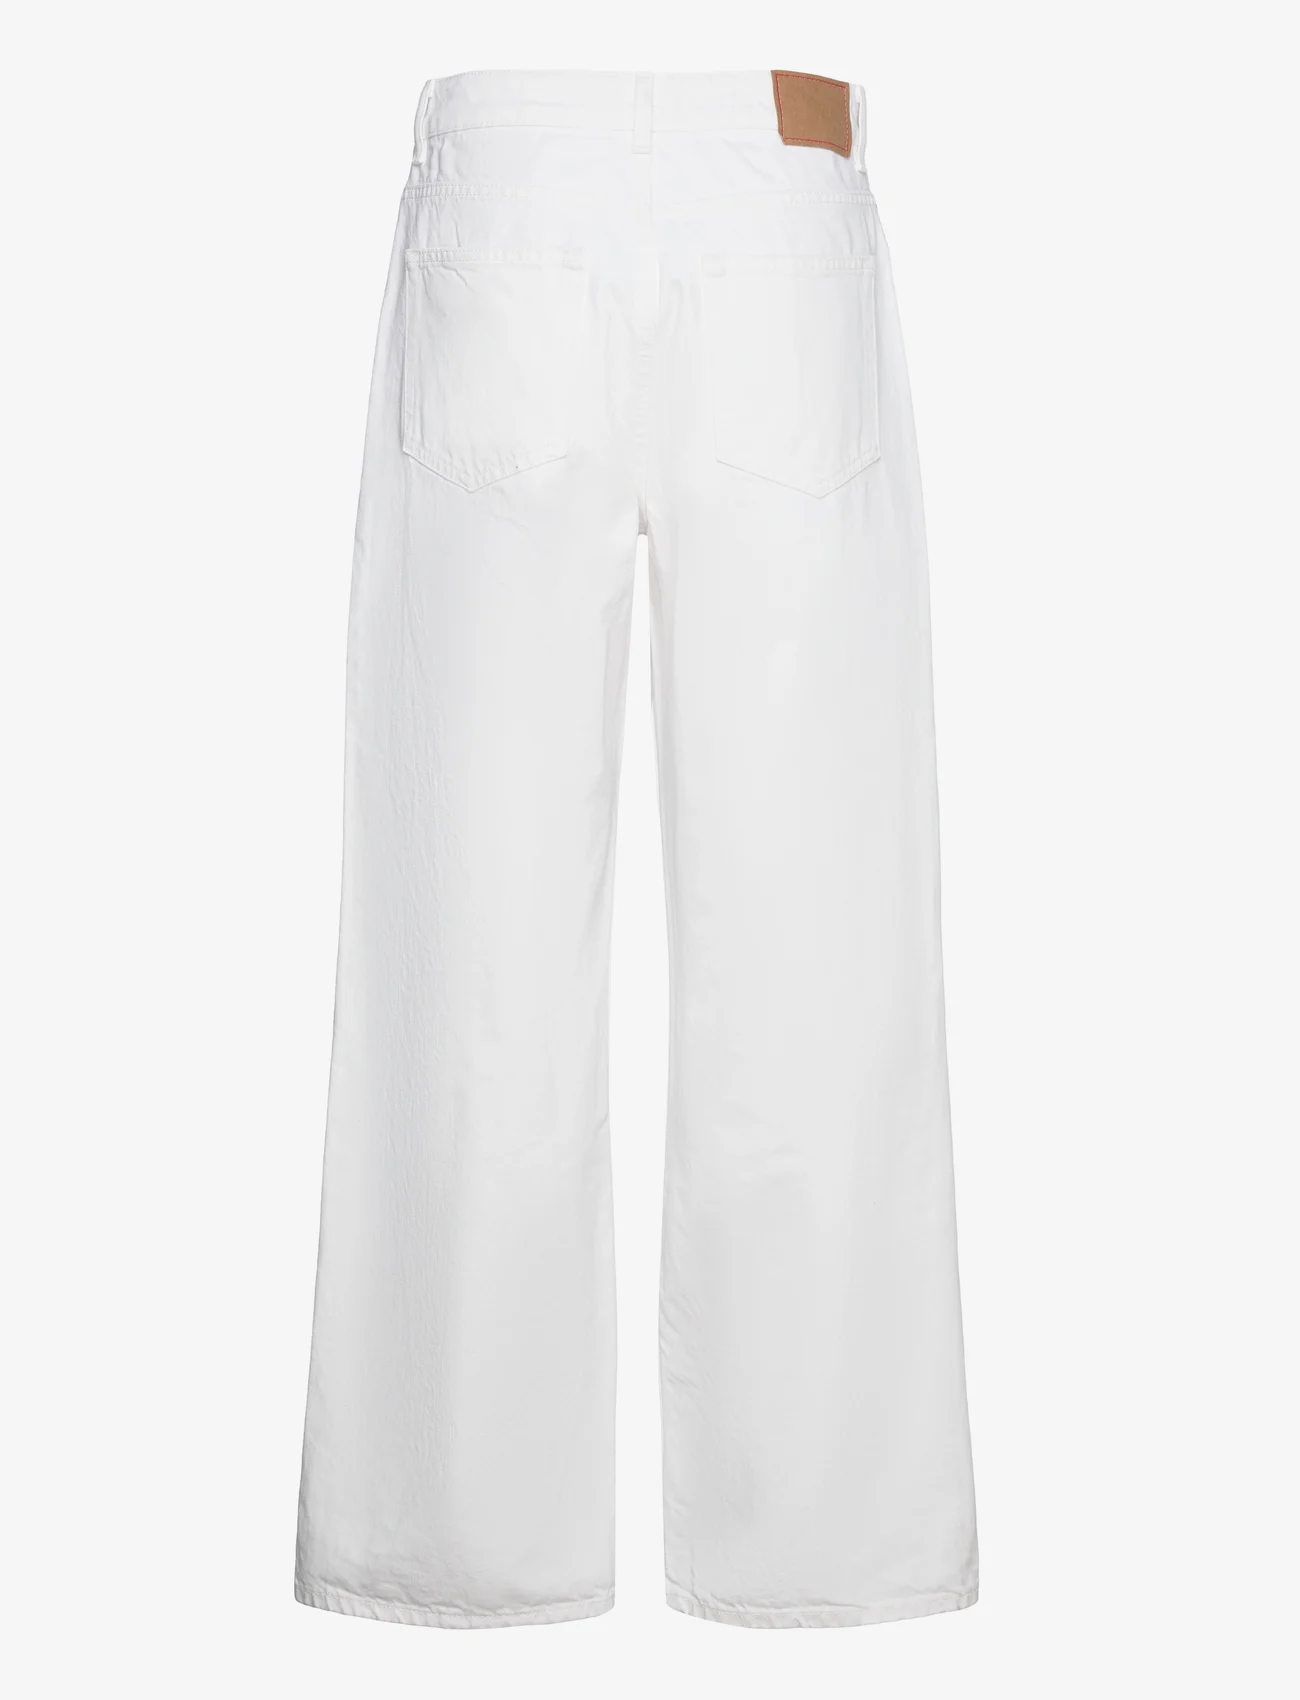 Jeanerica - BW017 Belem - wide leg jeans - natural white - 1